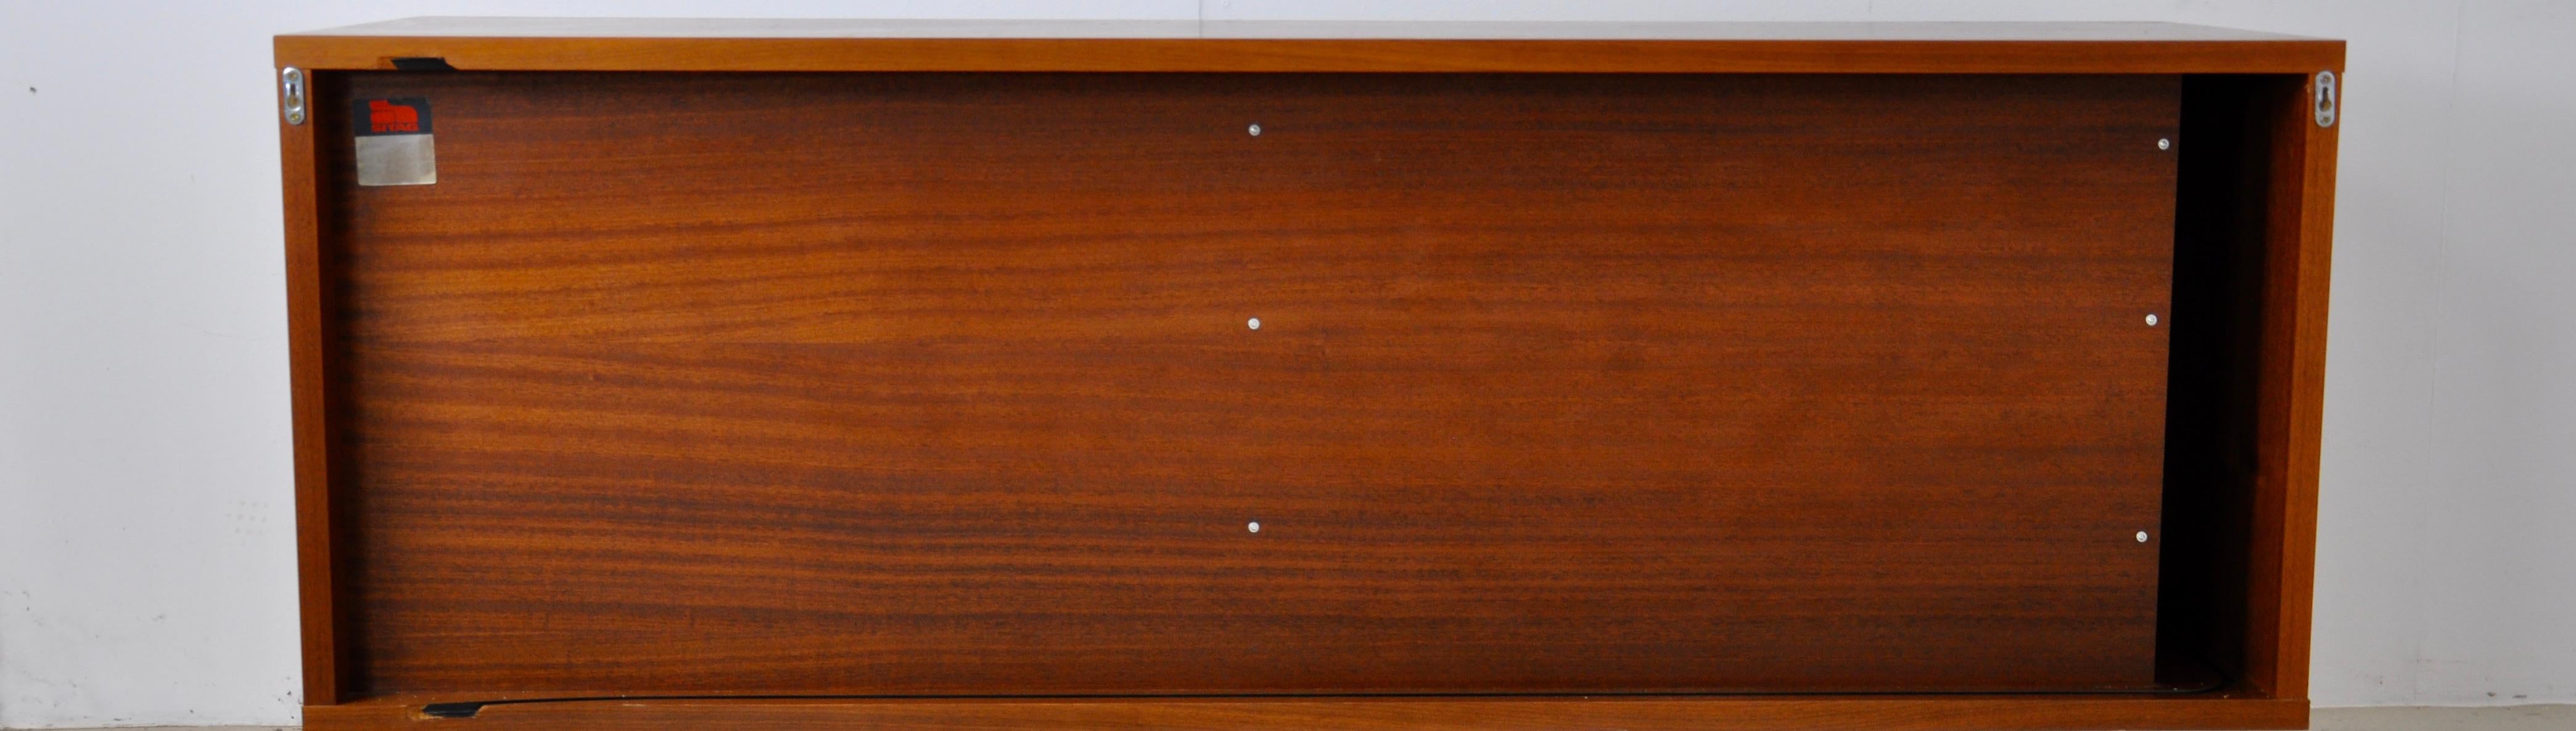 Wood Sideboard by Sitag for Swiss form, 1970s